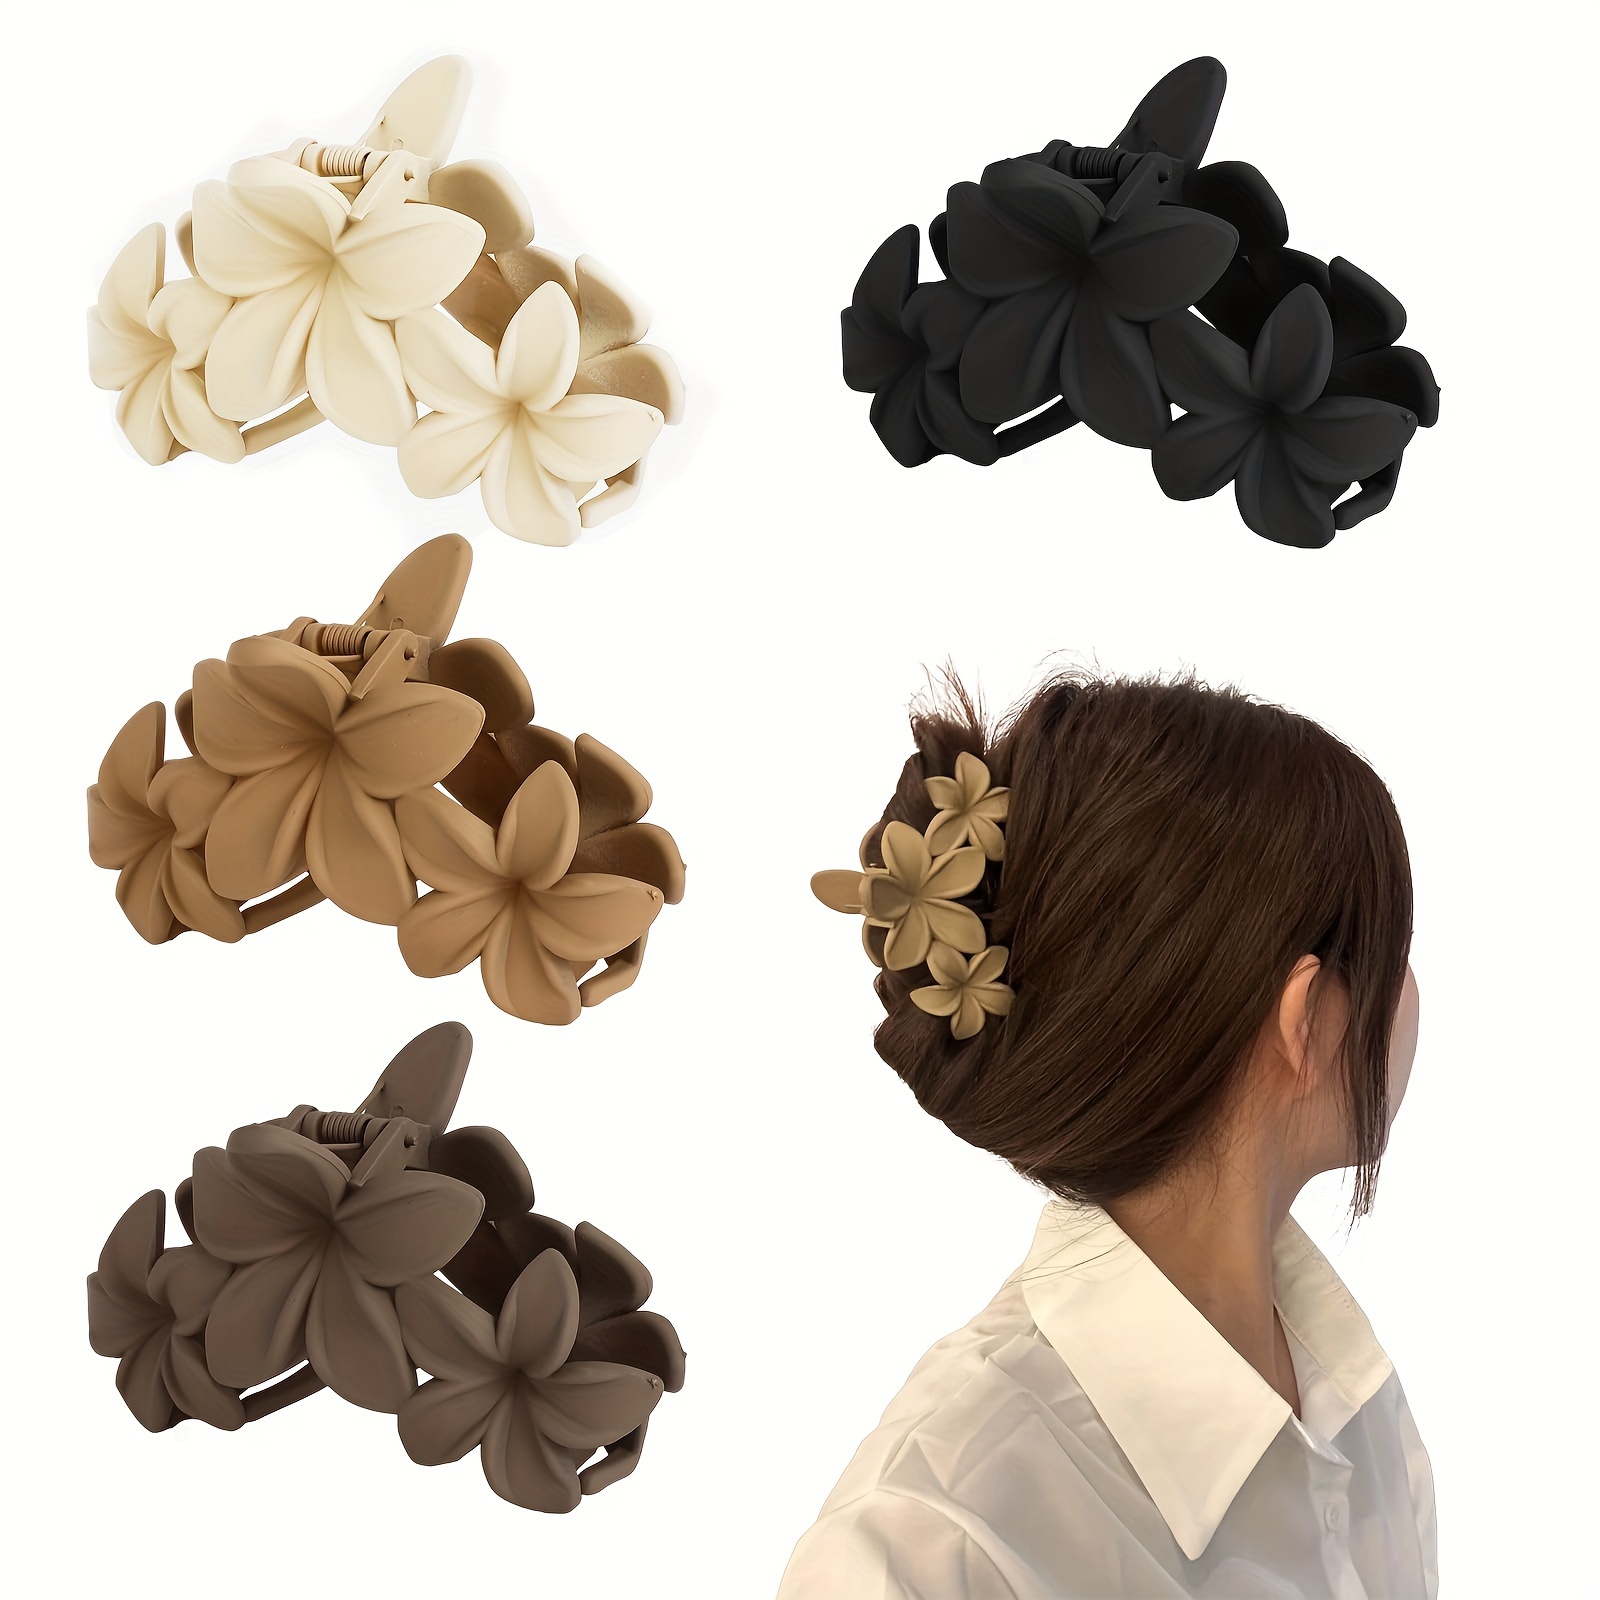 

4pcs/set Elegant Flower Decorative Hair Claw Clips Large Non Slip Hair Bun Makers Vintage Frosted Hair Grab Clips For Women And Daily Uses